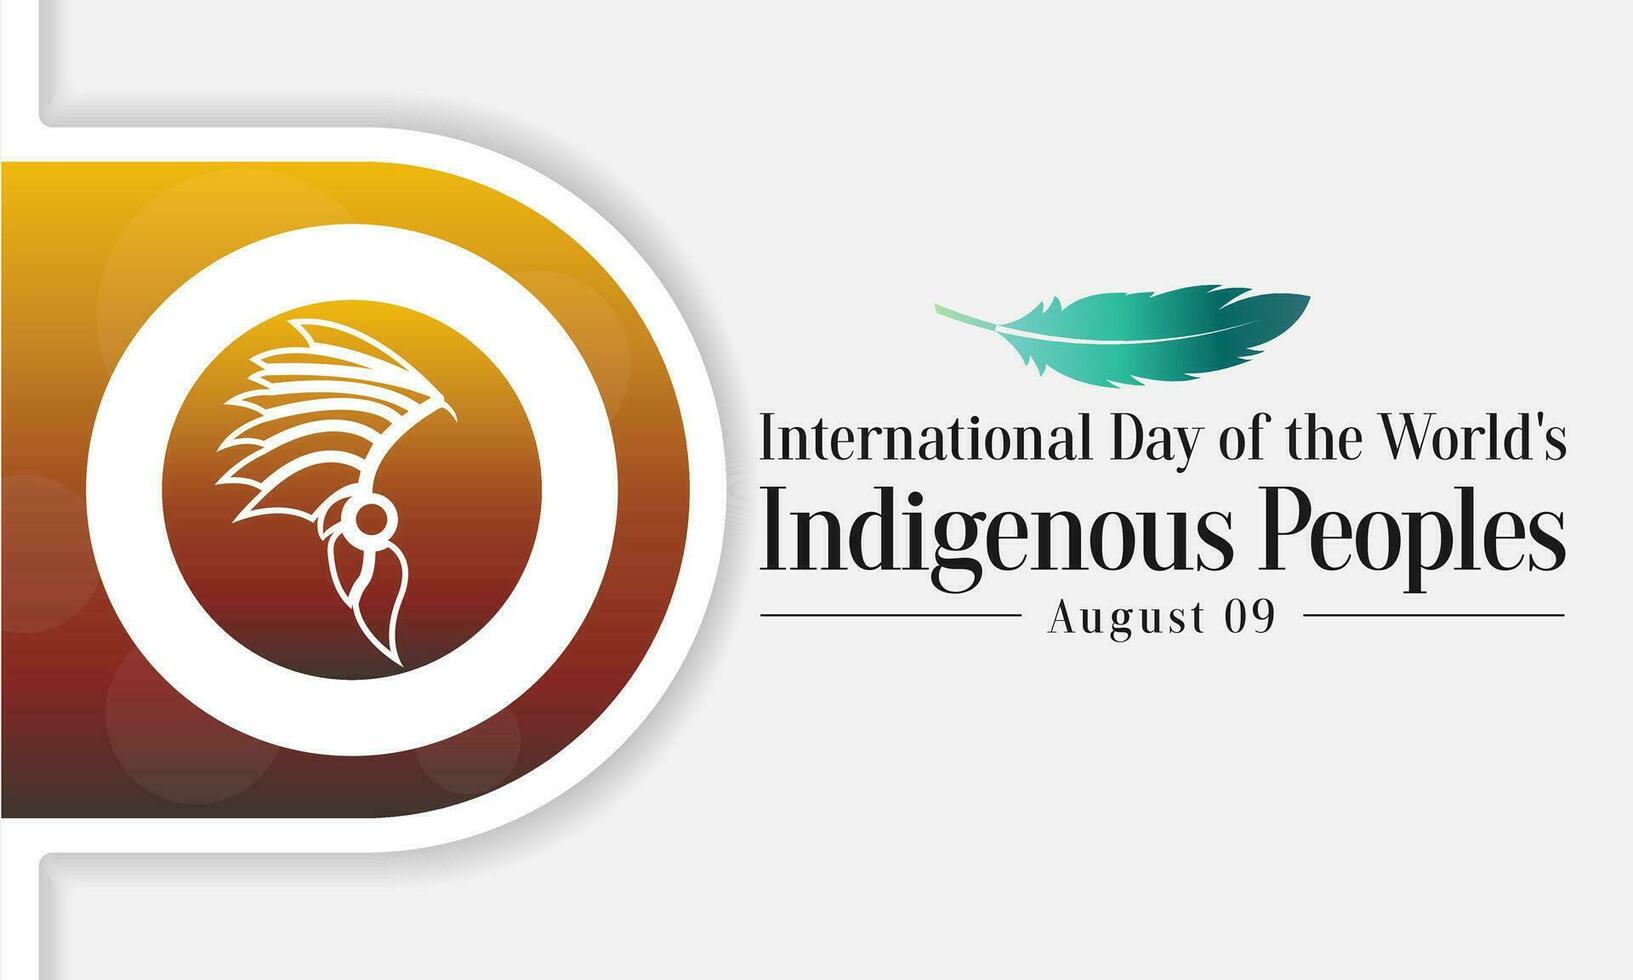 World Indigenous day is observed every year on August 9, to raise awareness and protect the rights of the indigenous population. vector illustration